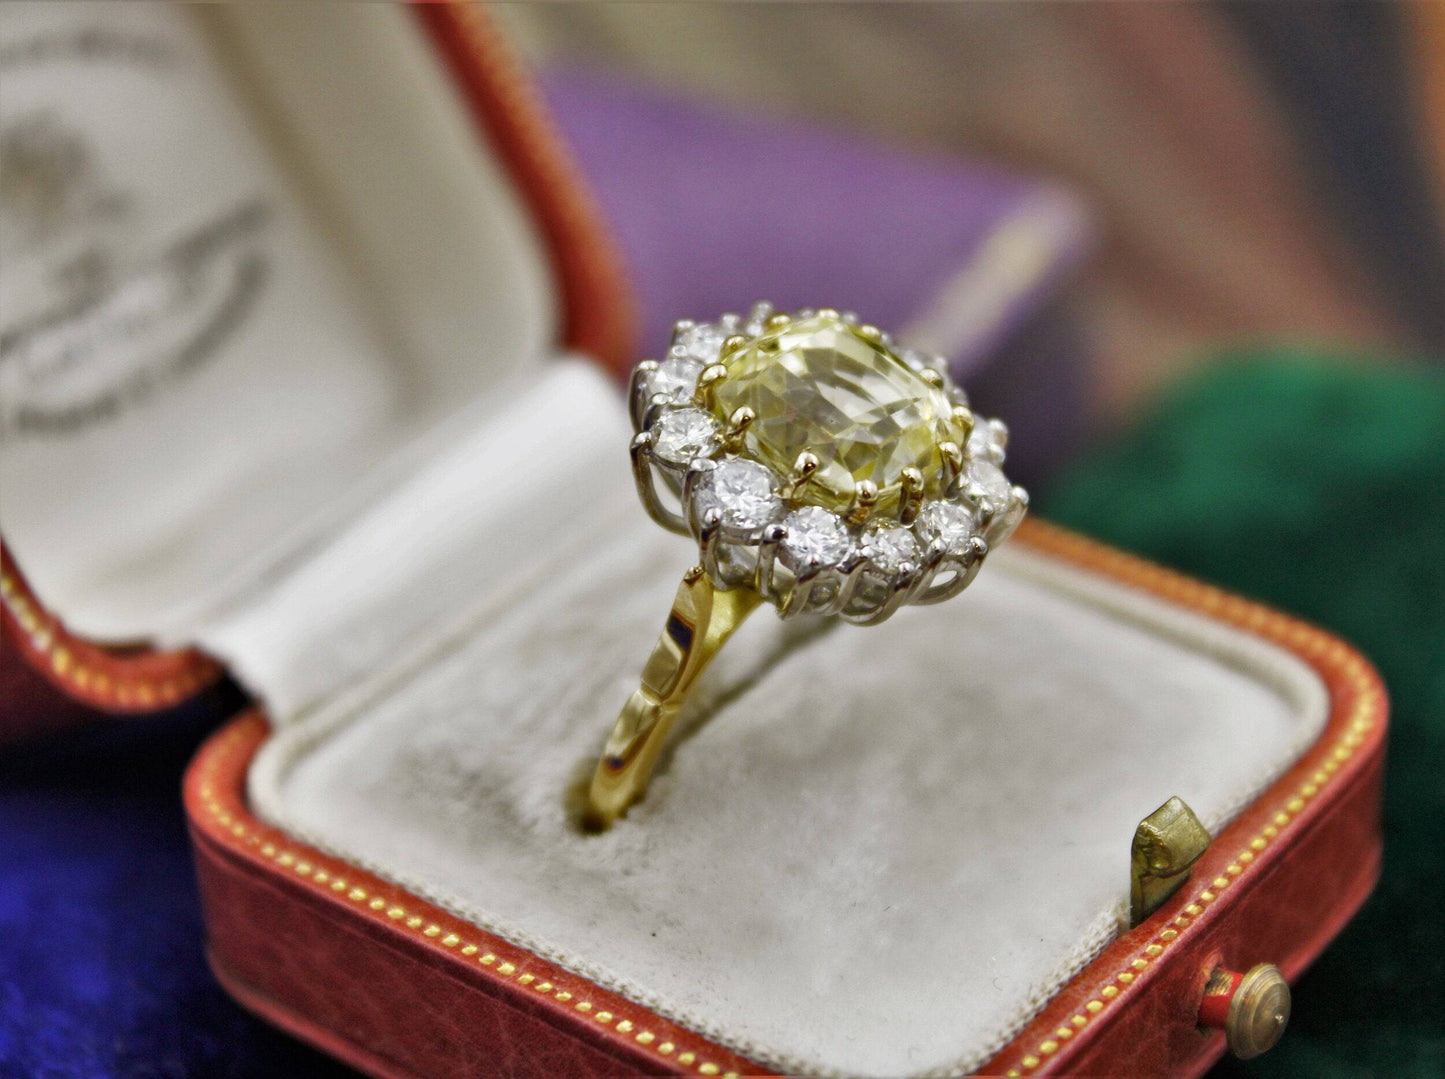 A very fine Natural Yellow Sapphire & Diamond Ring set in 18ct White & Yellow Gold, Circa 1985 - Robin Haydock Antiques